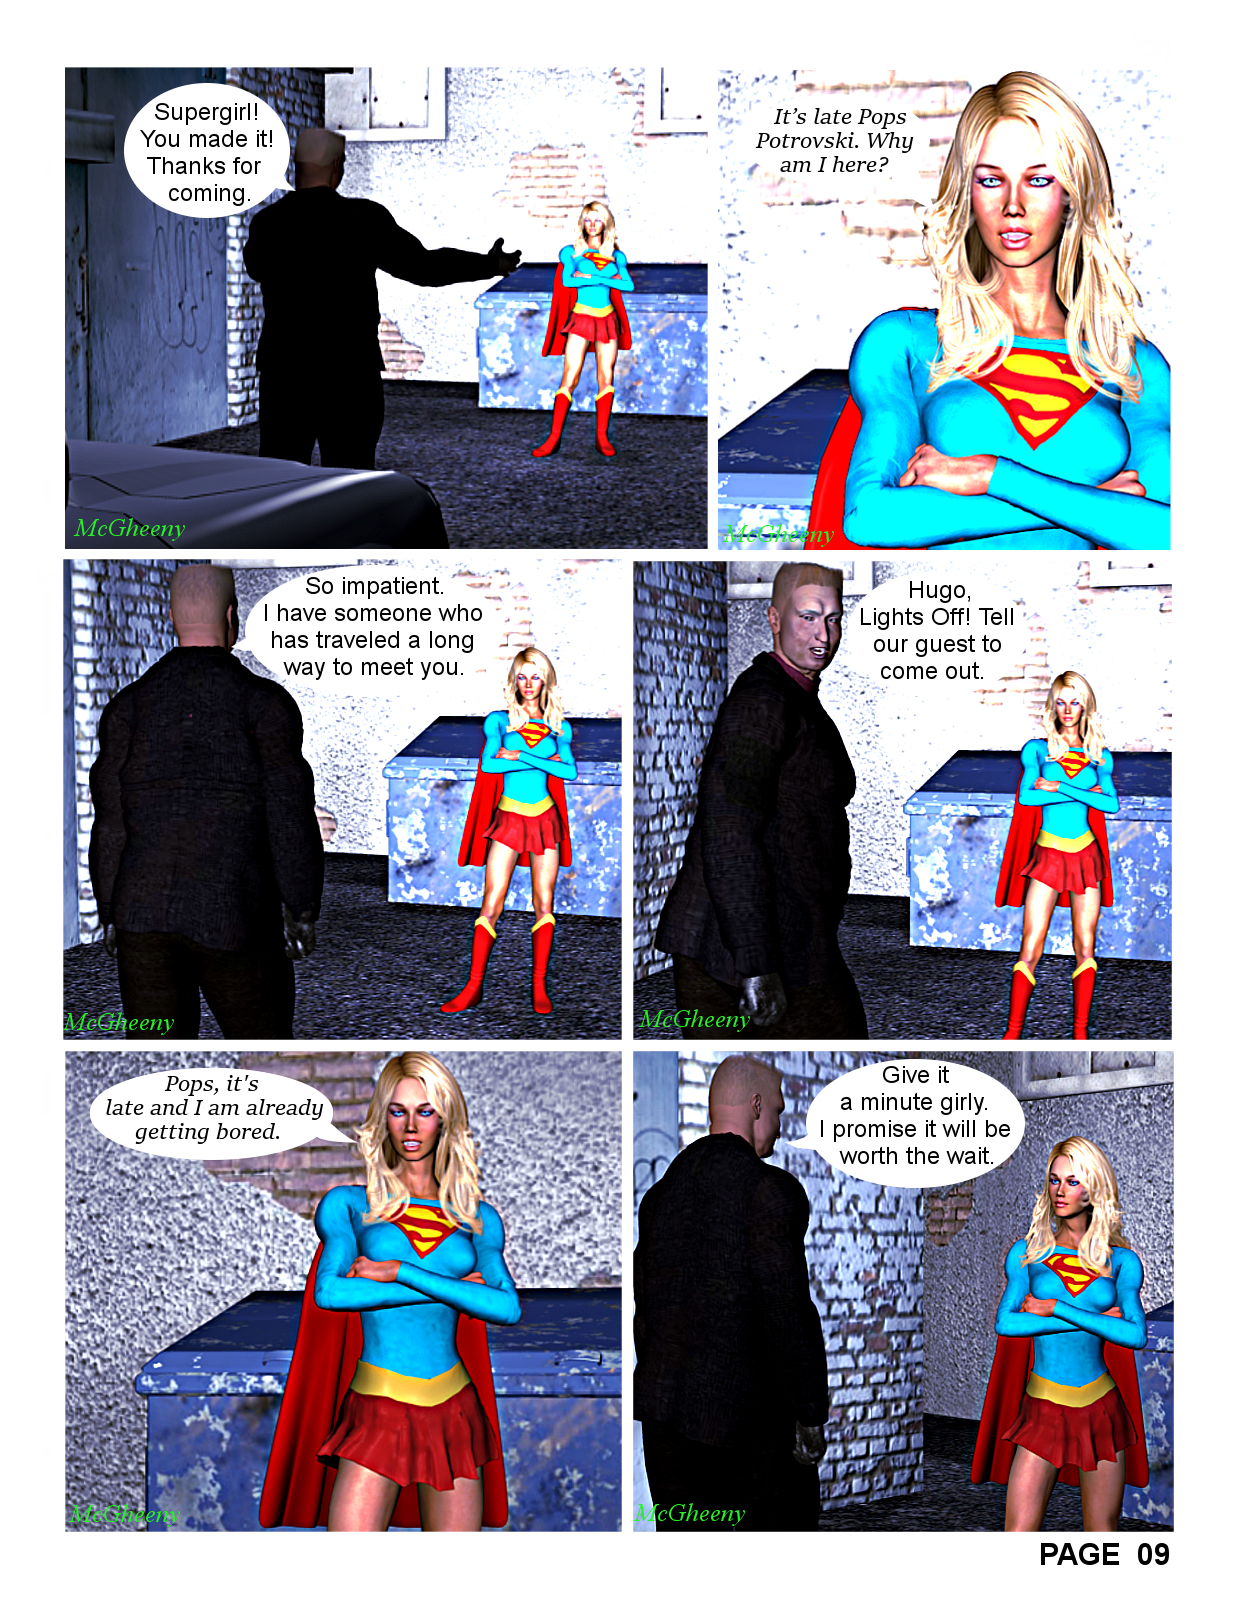 Supergirl in Banors Prize Page 09.png